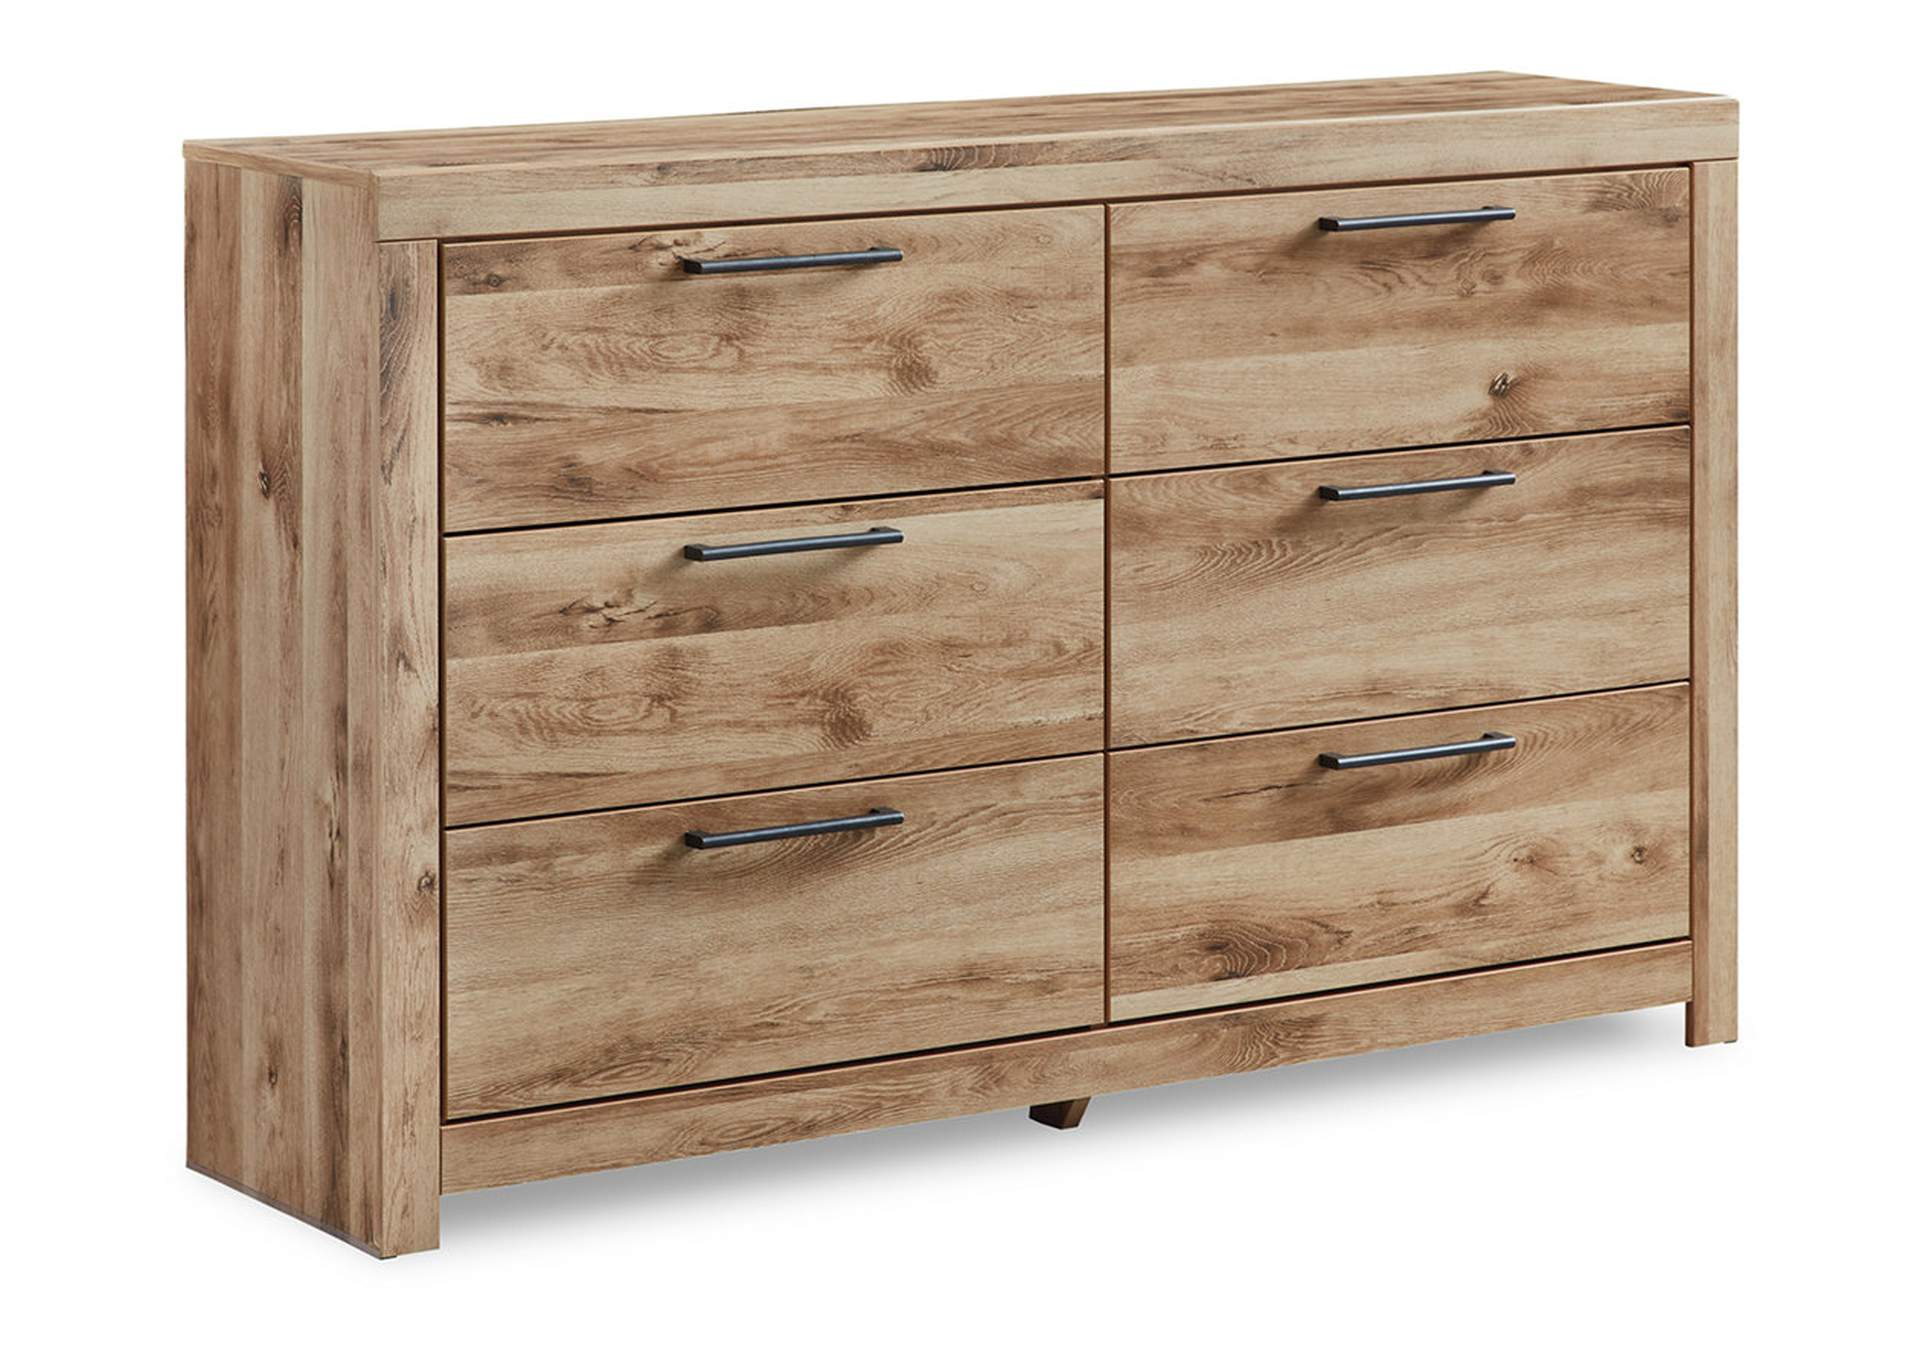 Hyanna King Panel Storage Bed, Dresser and 2 Nightstands,Signature Design By Ashley